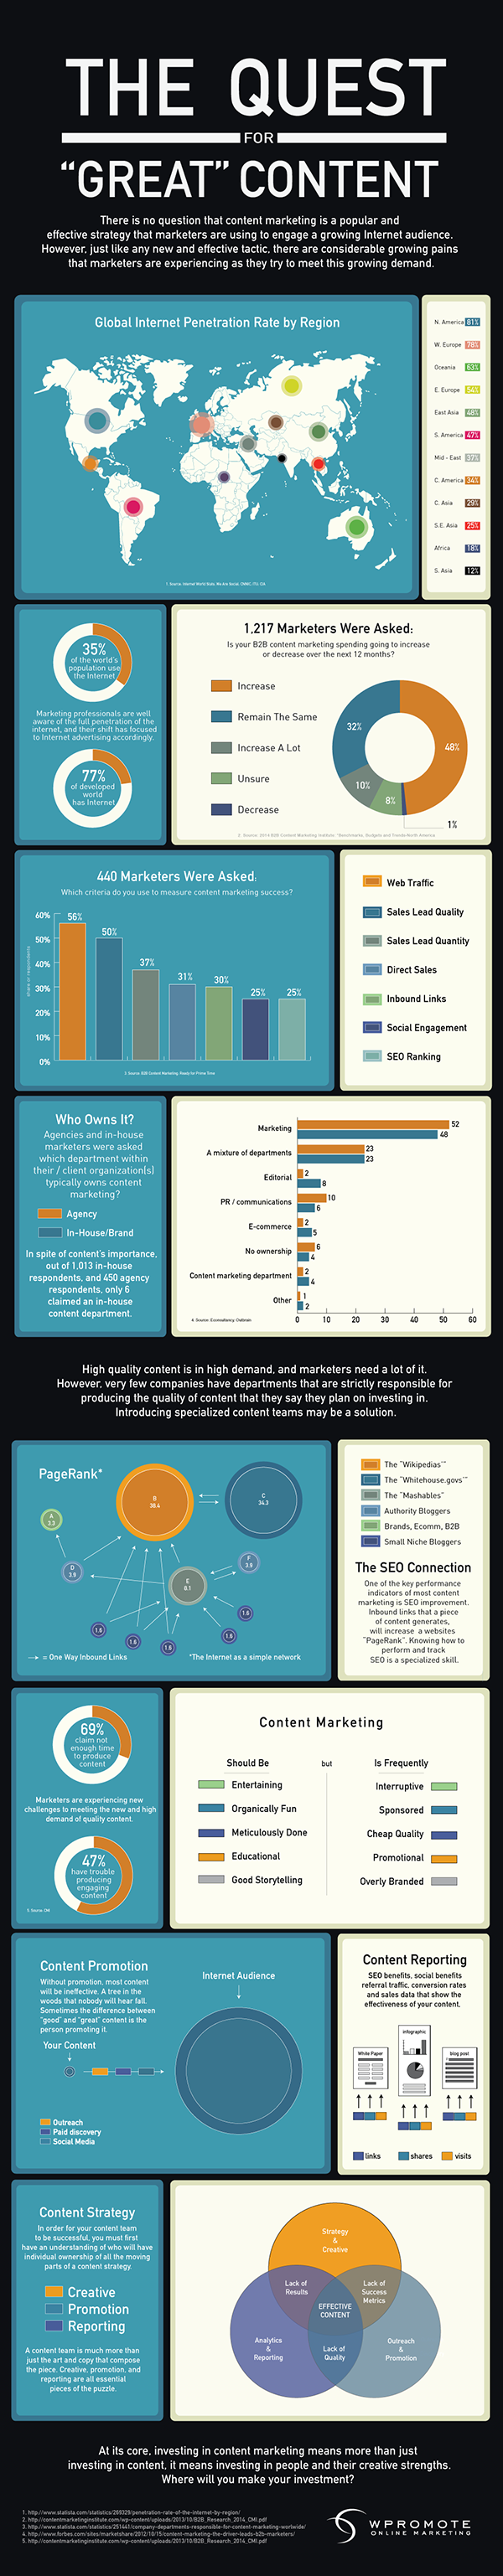 How About Online Marketing for Your Church? [Infographic]